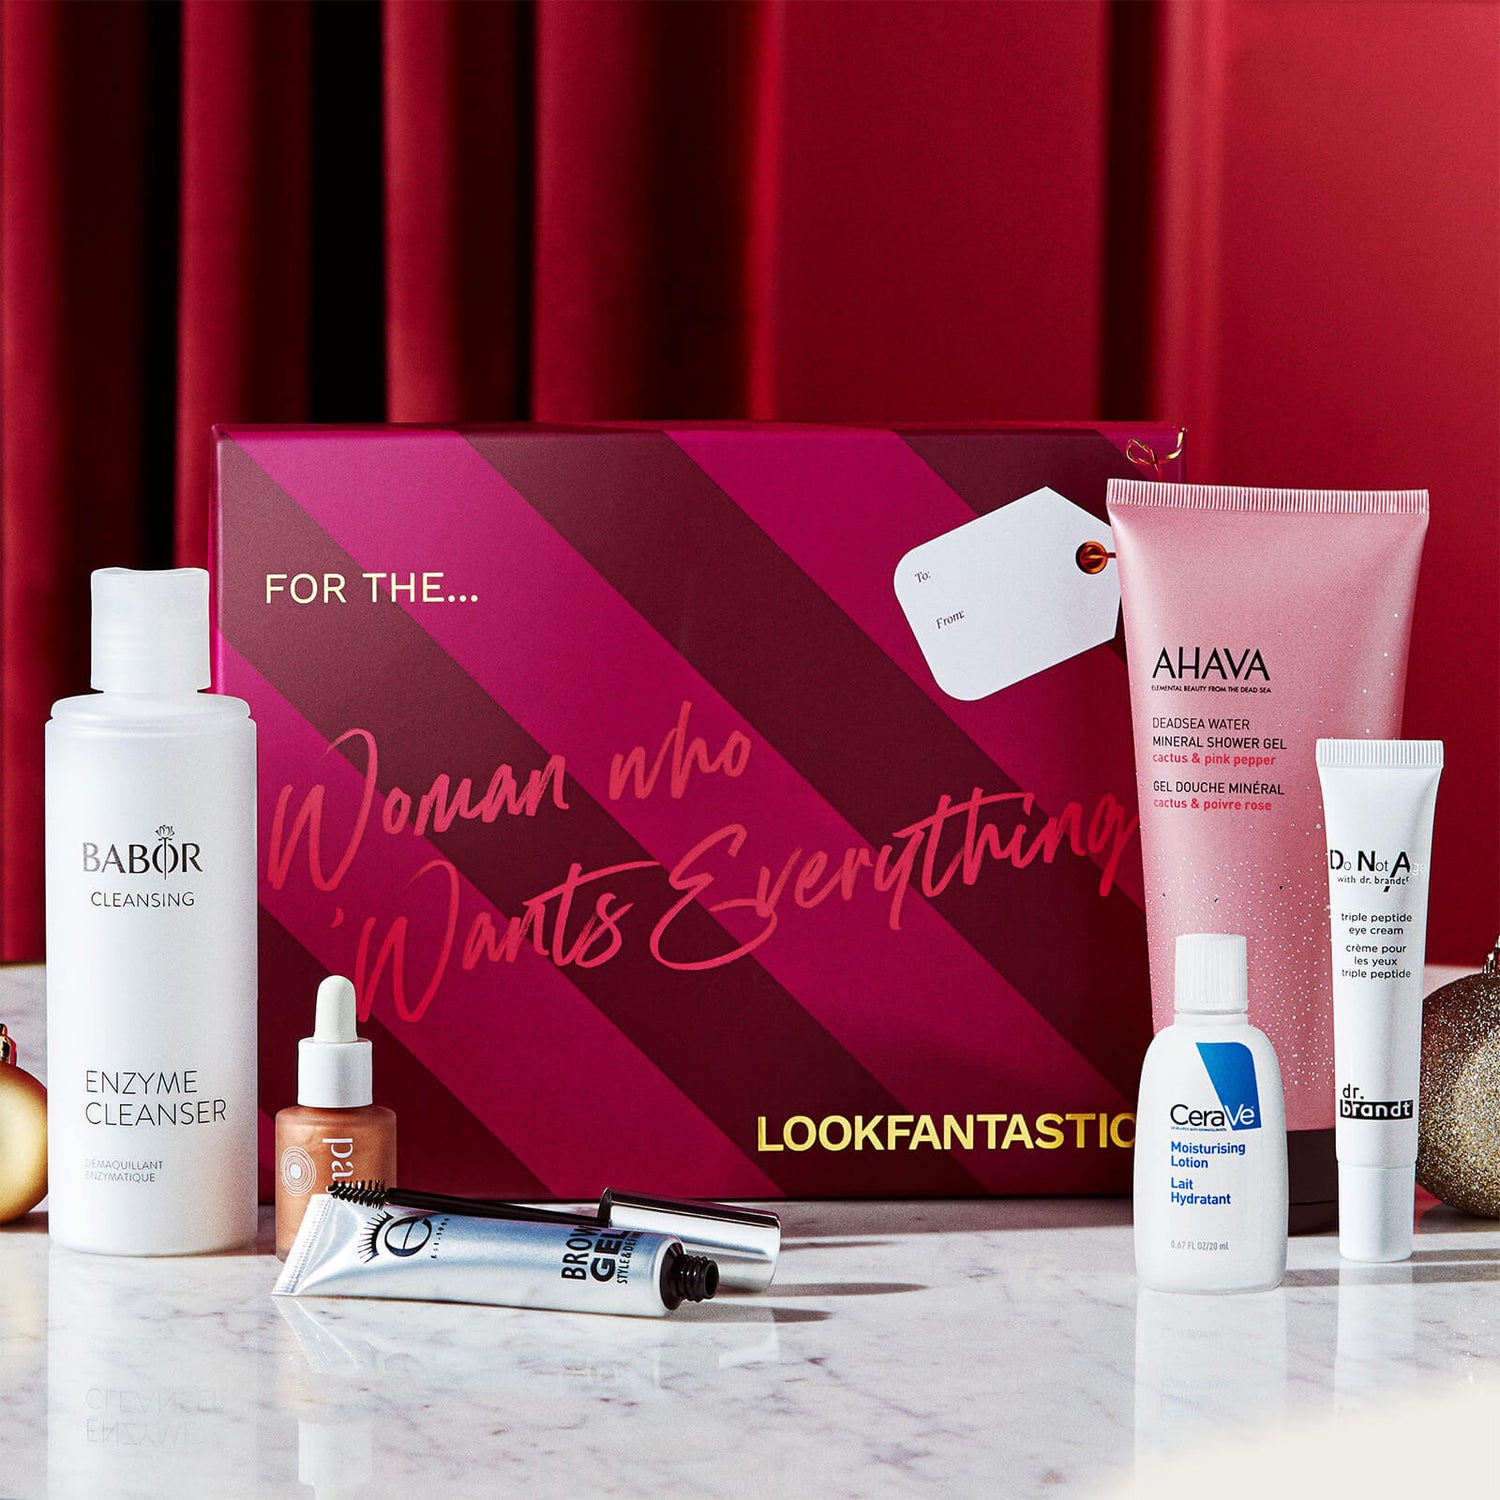 LOOKFANTASTIC Gift Guide - The Woman Beauty Box 2021 (Worth Over $245.00)